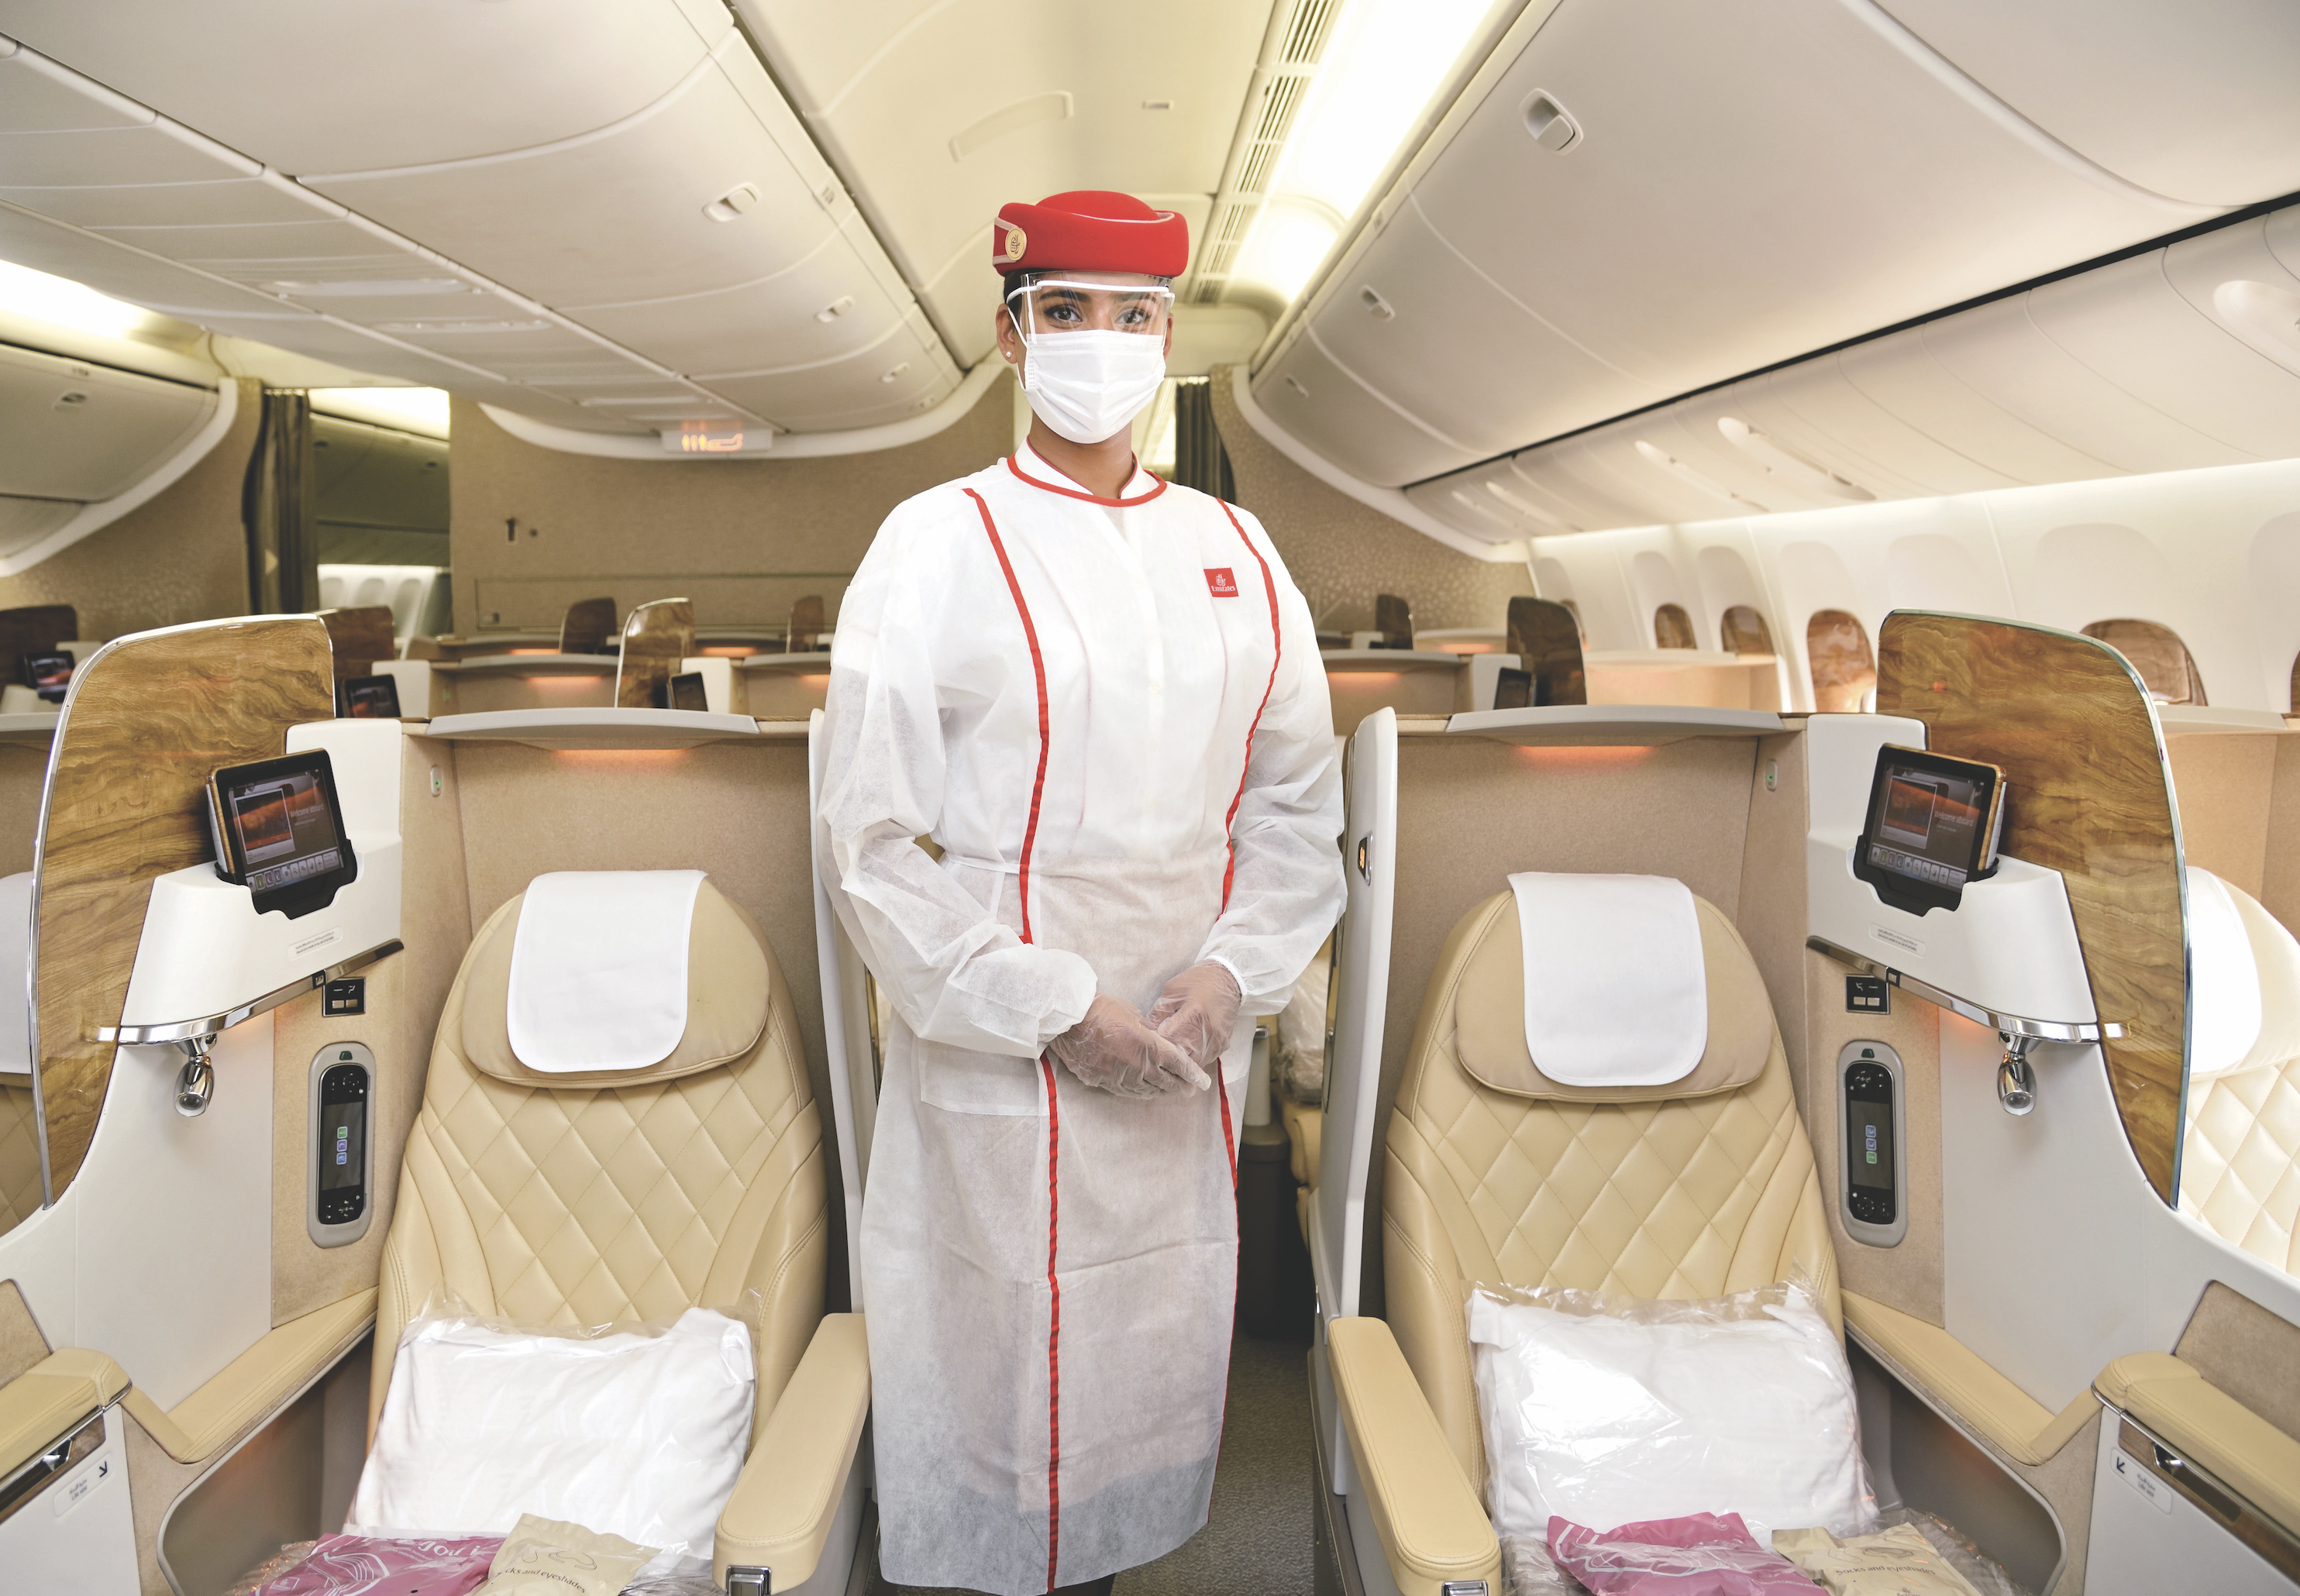 Onboard Emirates during Covid